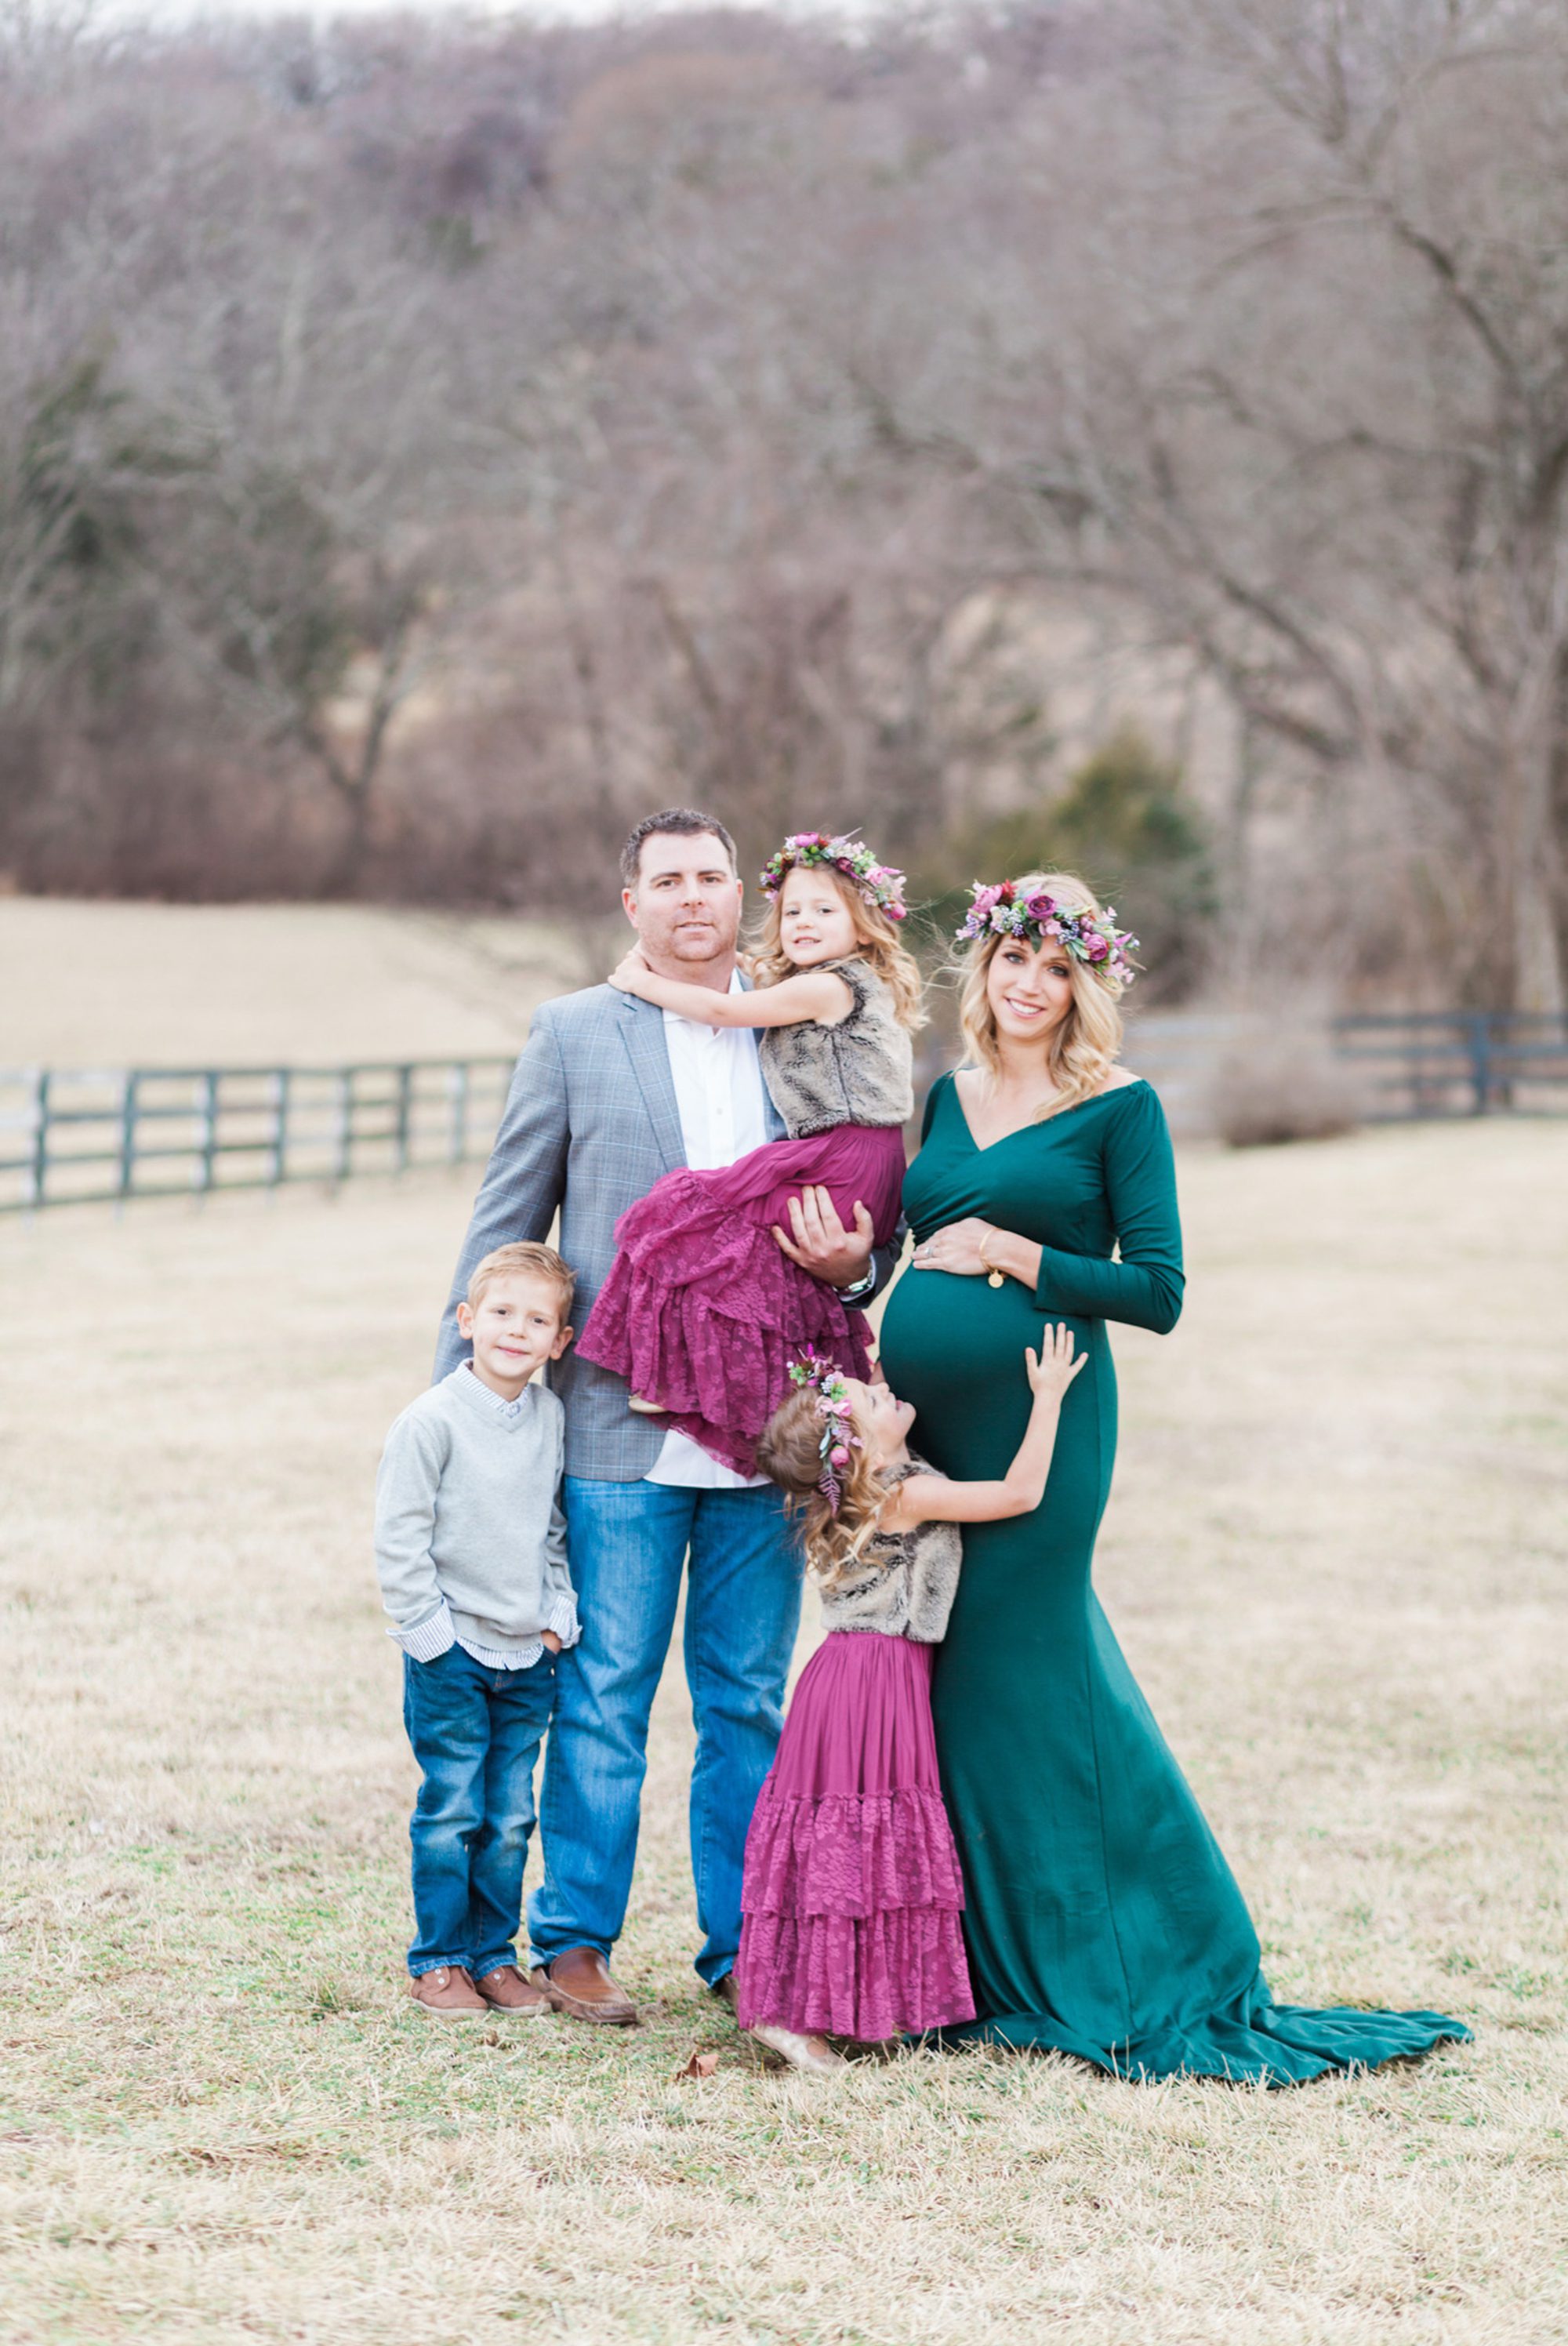 Sarah's Winter Maternity Session - Krista Lee Photography